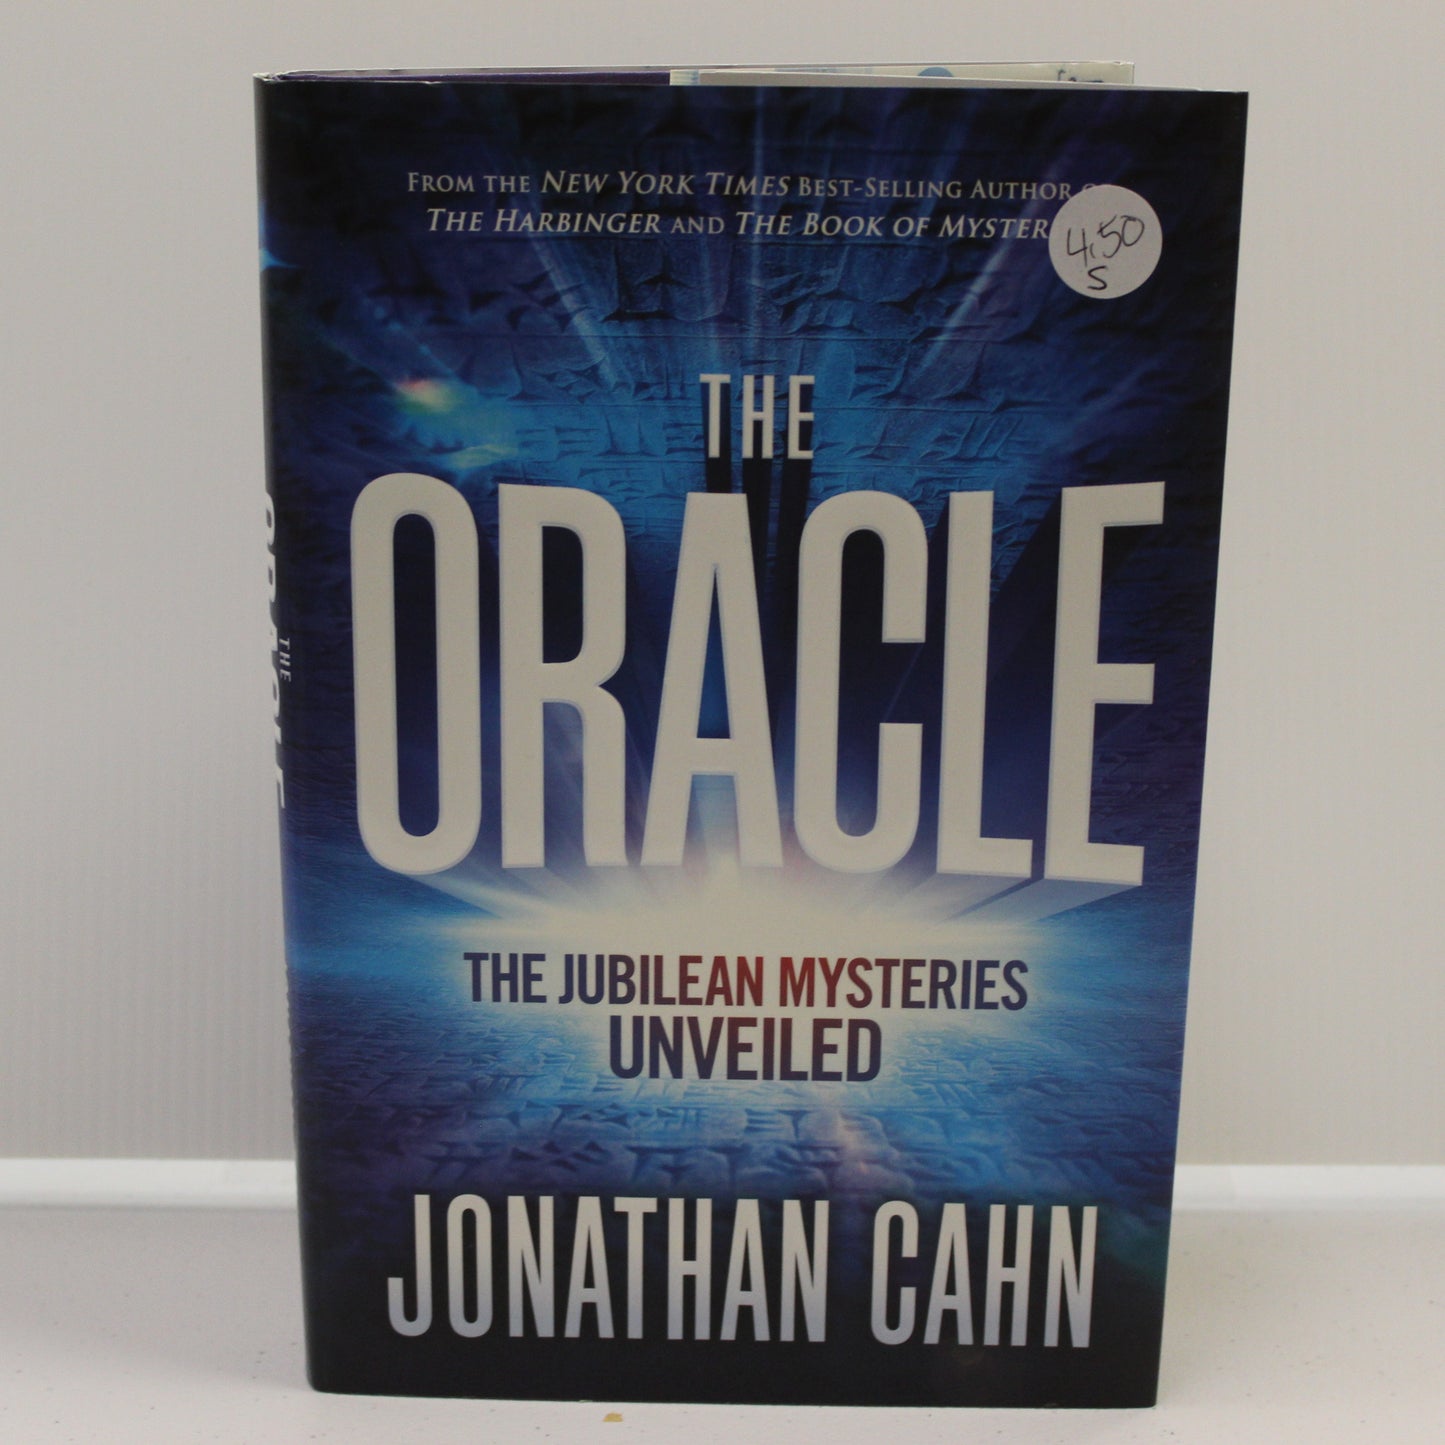 THE ORACLE - THE JUBILEAN MYSTERIES UNVEILED